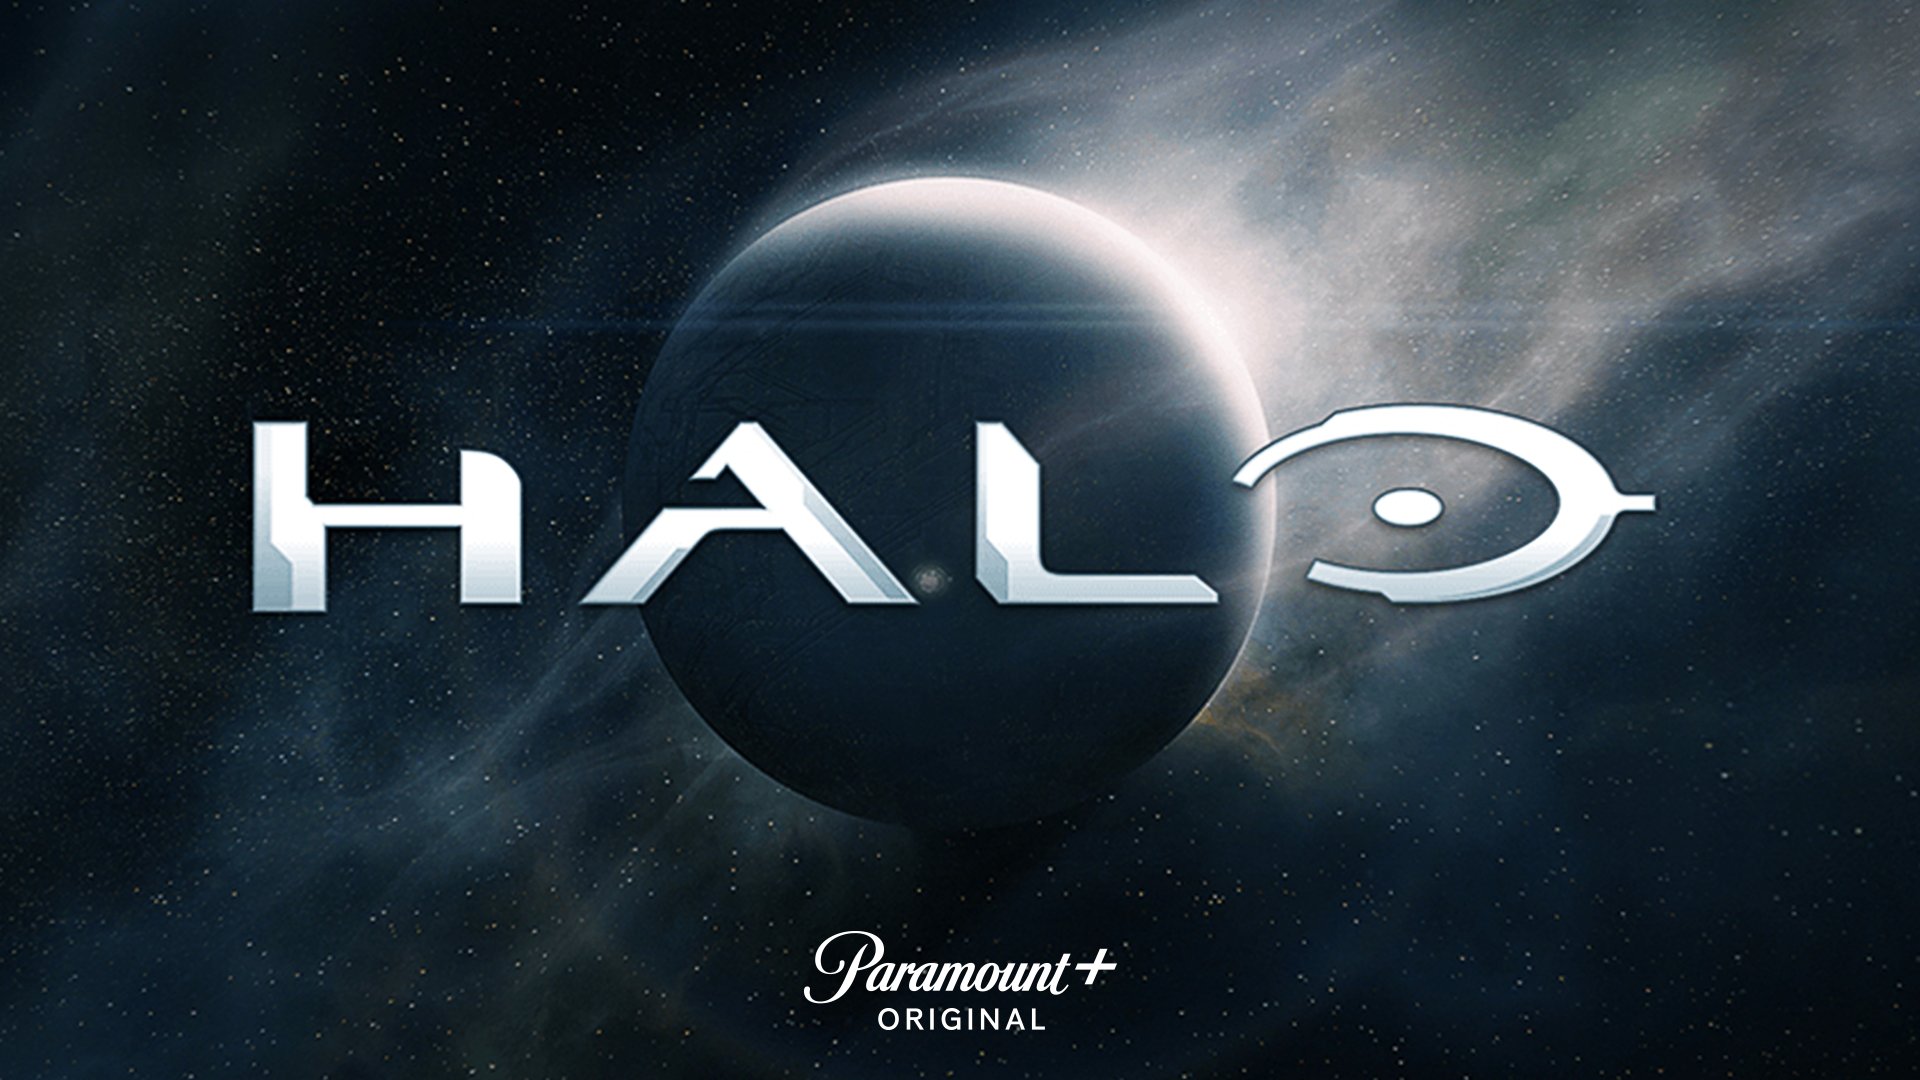 Halo - Poster for a series based on high-budget games